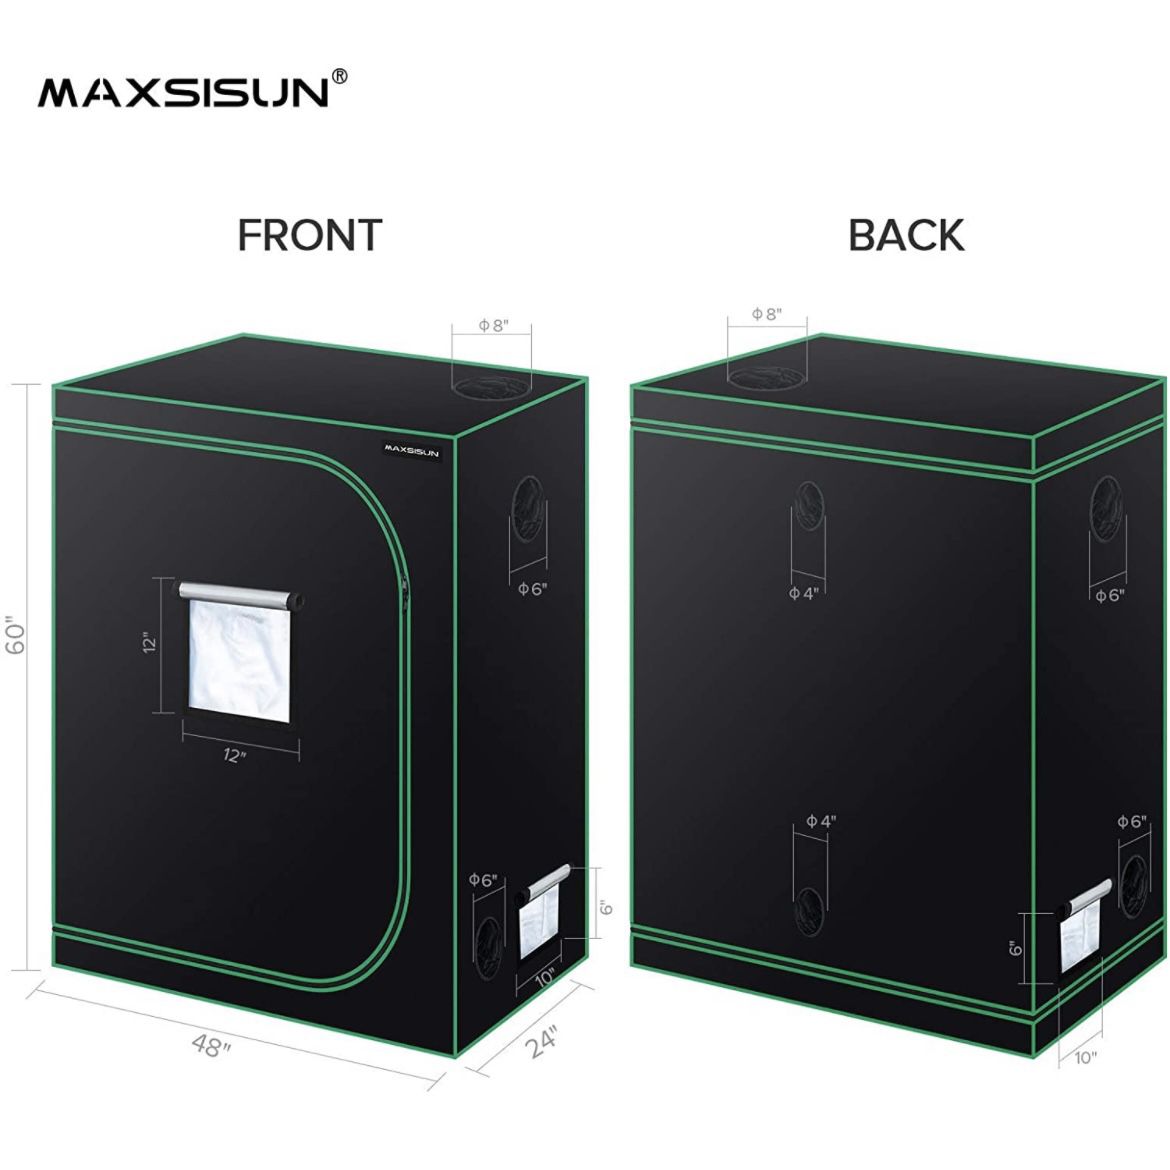 MAXSISUN 4x2 Grow Tent 600D Mylar Hydroponic Indoor Plants Growing Tent with Observation Window and Floor Tray 48x24x60 Grow Cabinet